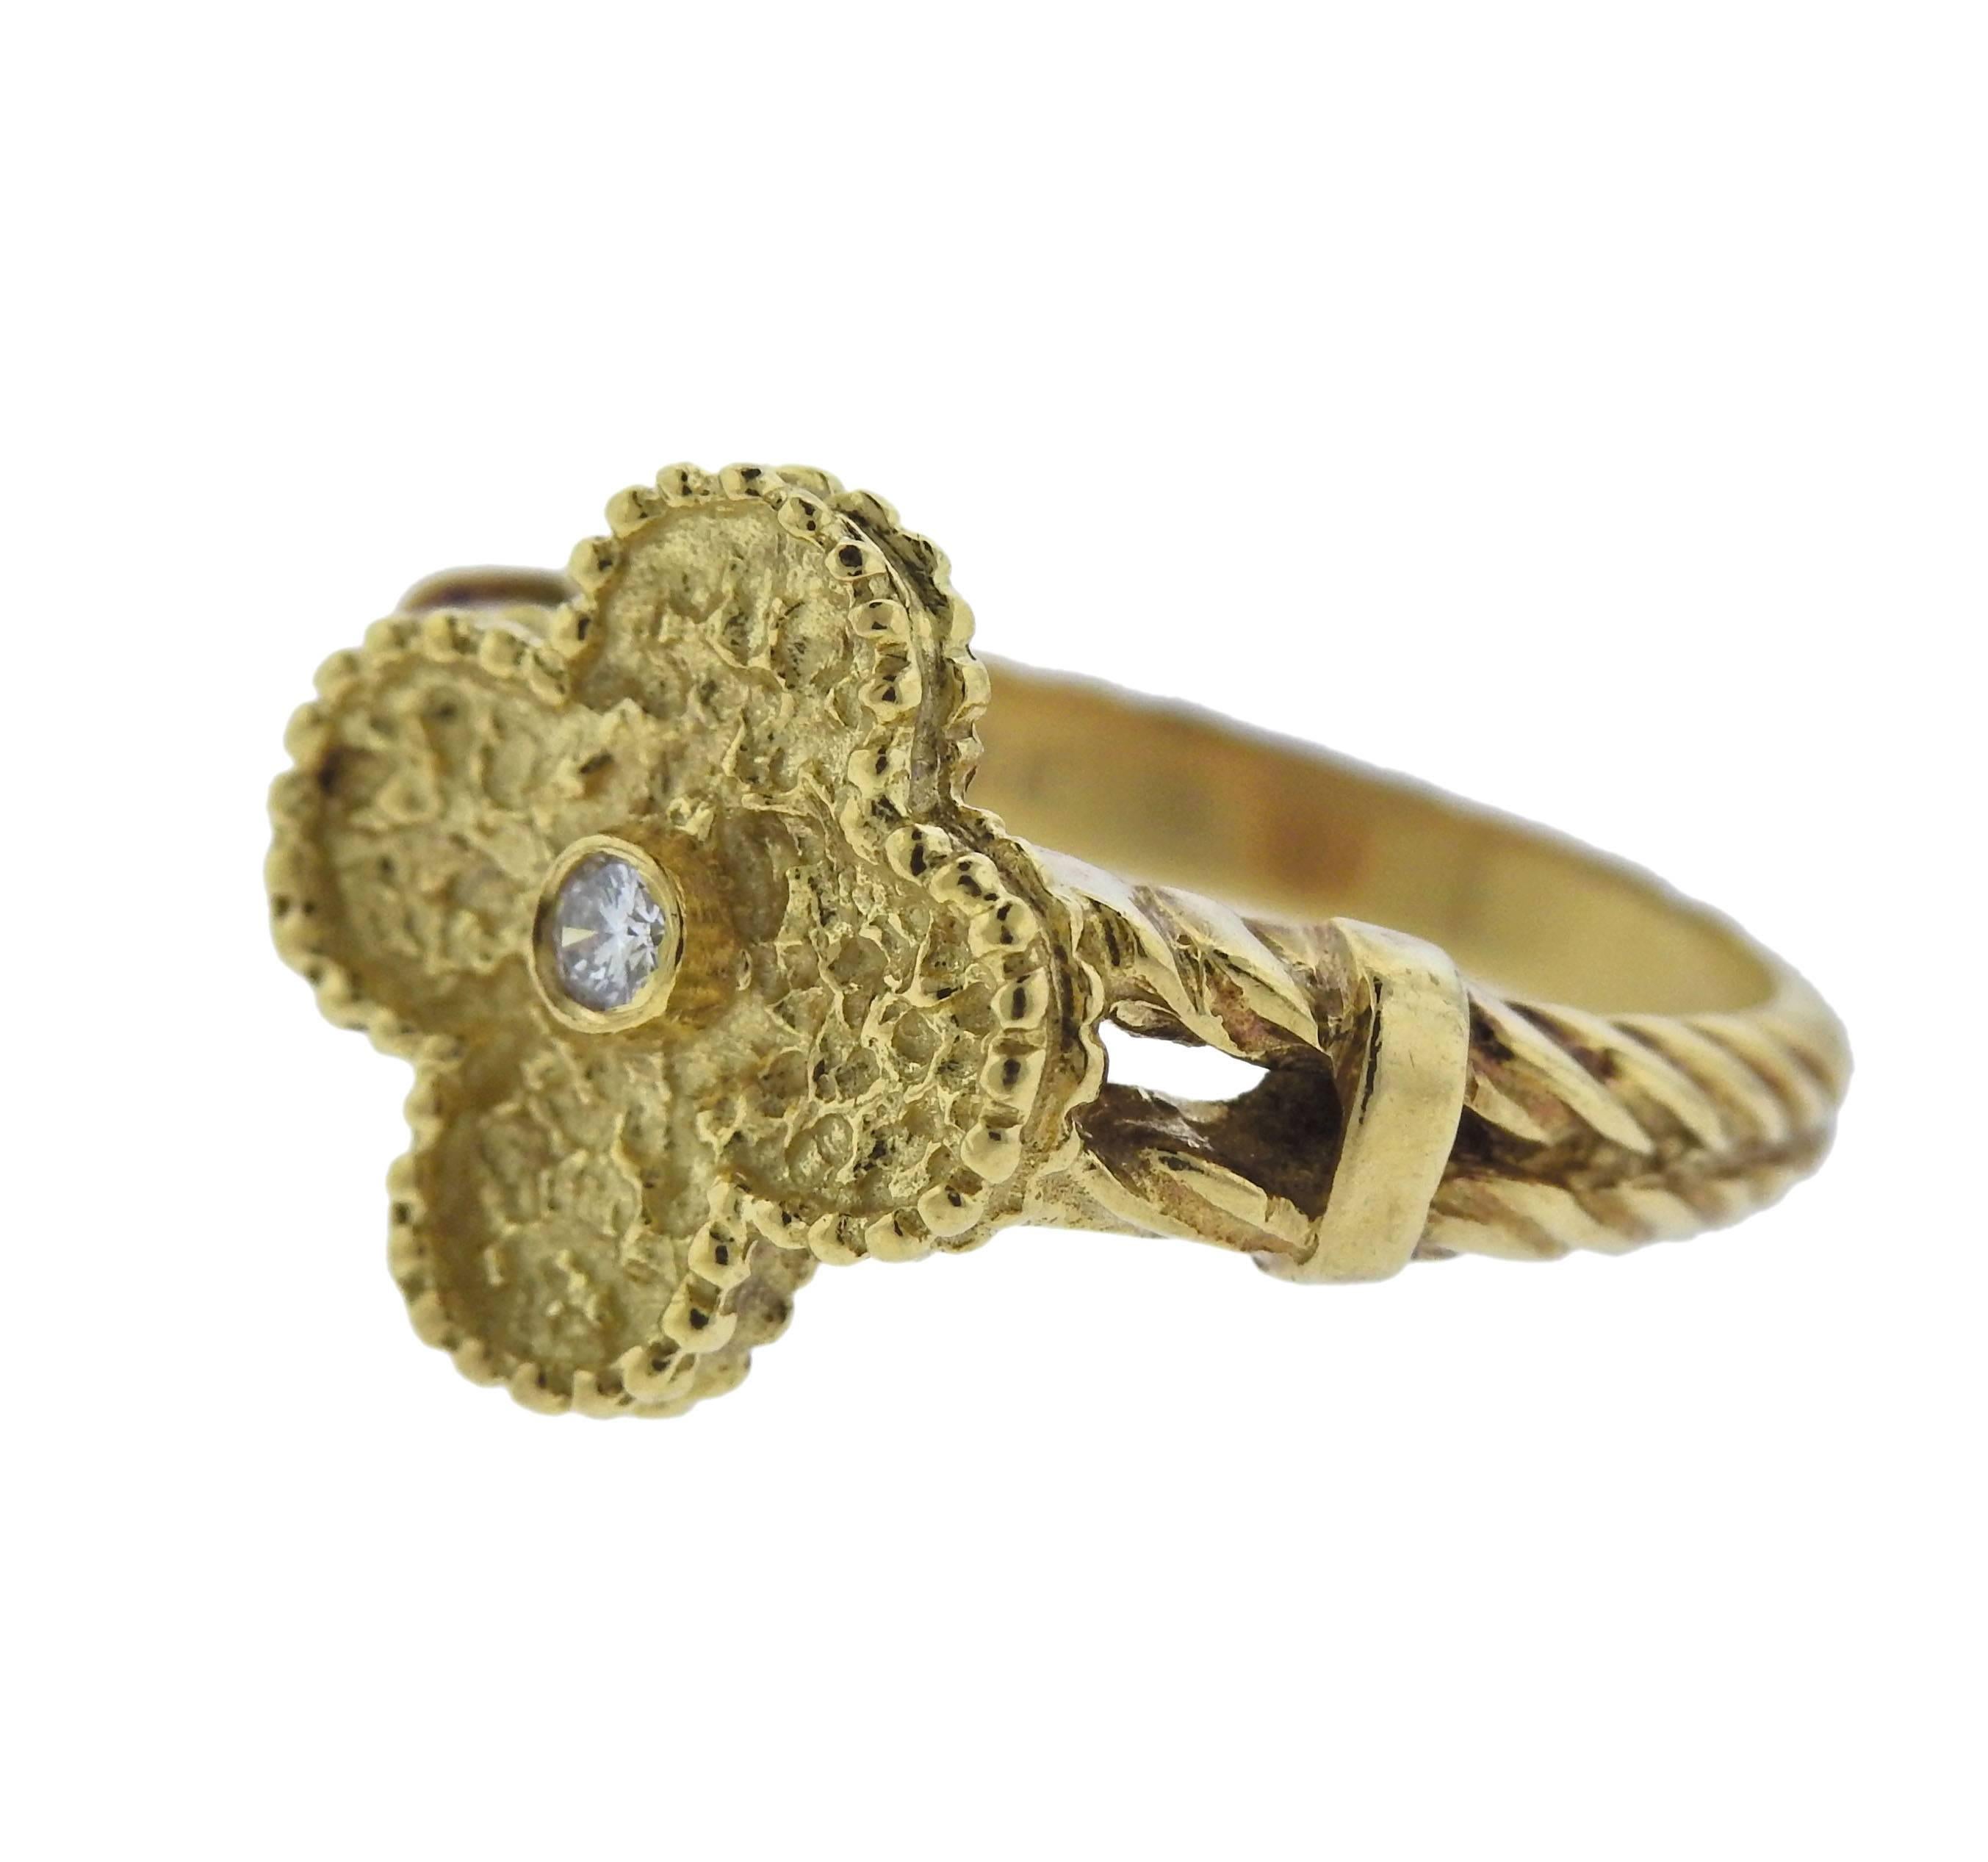  18k yellow gold Vintage Alhambra ring, crafted by Van Cleef & Arpels, set with a 0.06ct VVS/FG diamond in the center.  Ring size - 6.25, ring top - 13mm 13mm, weighs 5 grams. Marked: VCA NY, 18k, GV 605, 21**.